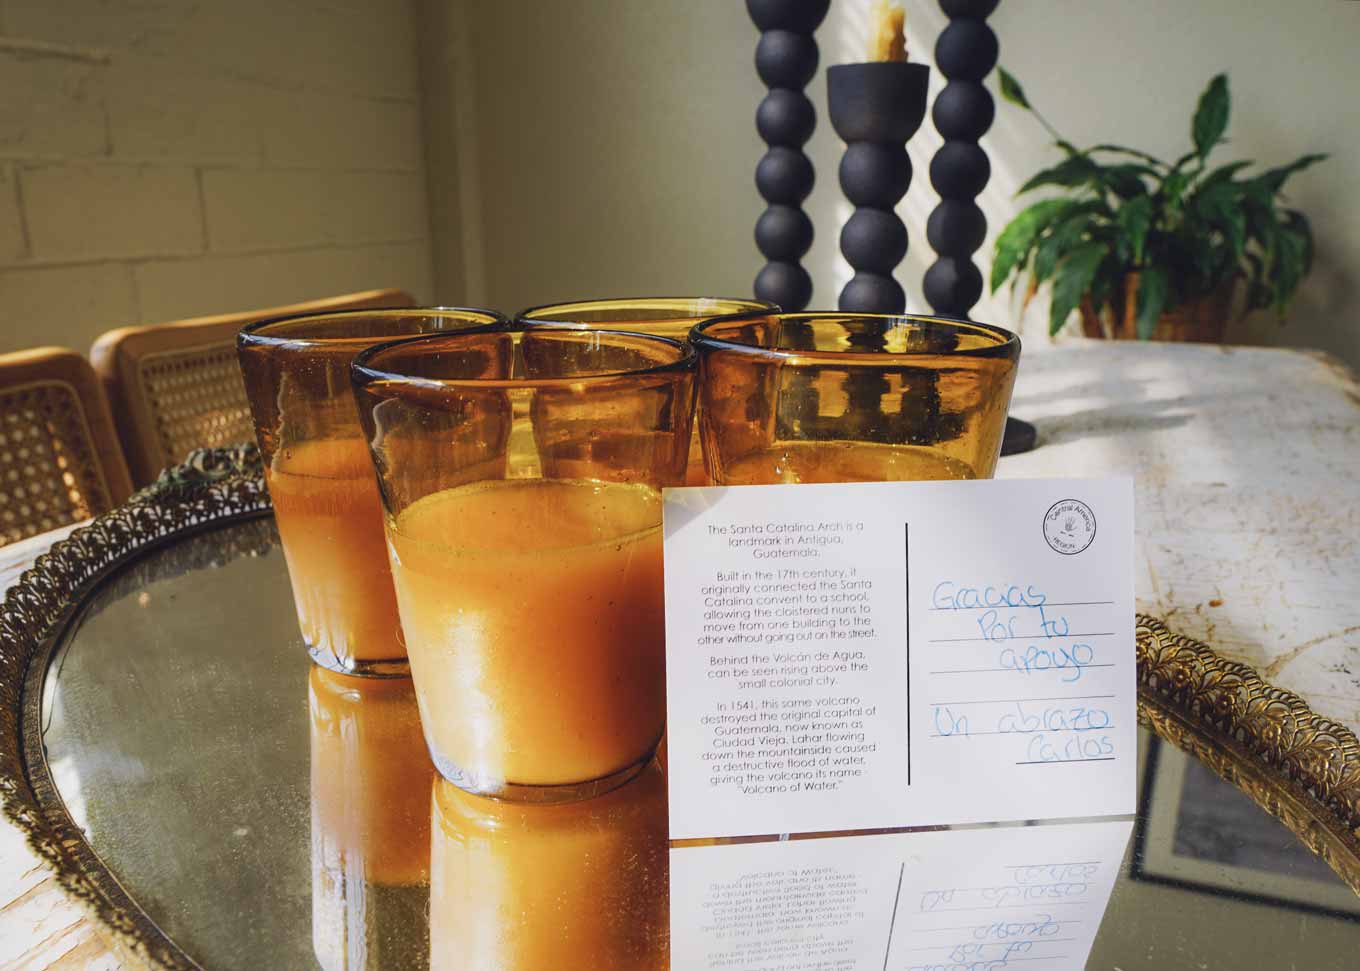 Four hand-blown recycled drinking glasses in amber on a tray at a table, with a note from the maker written in Spanish